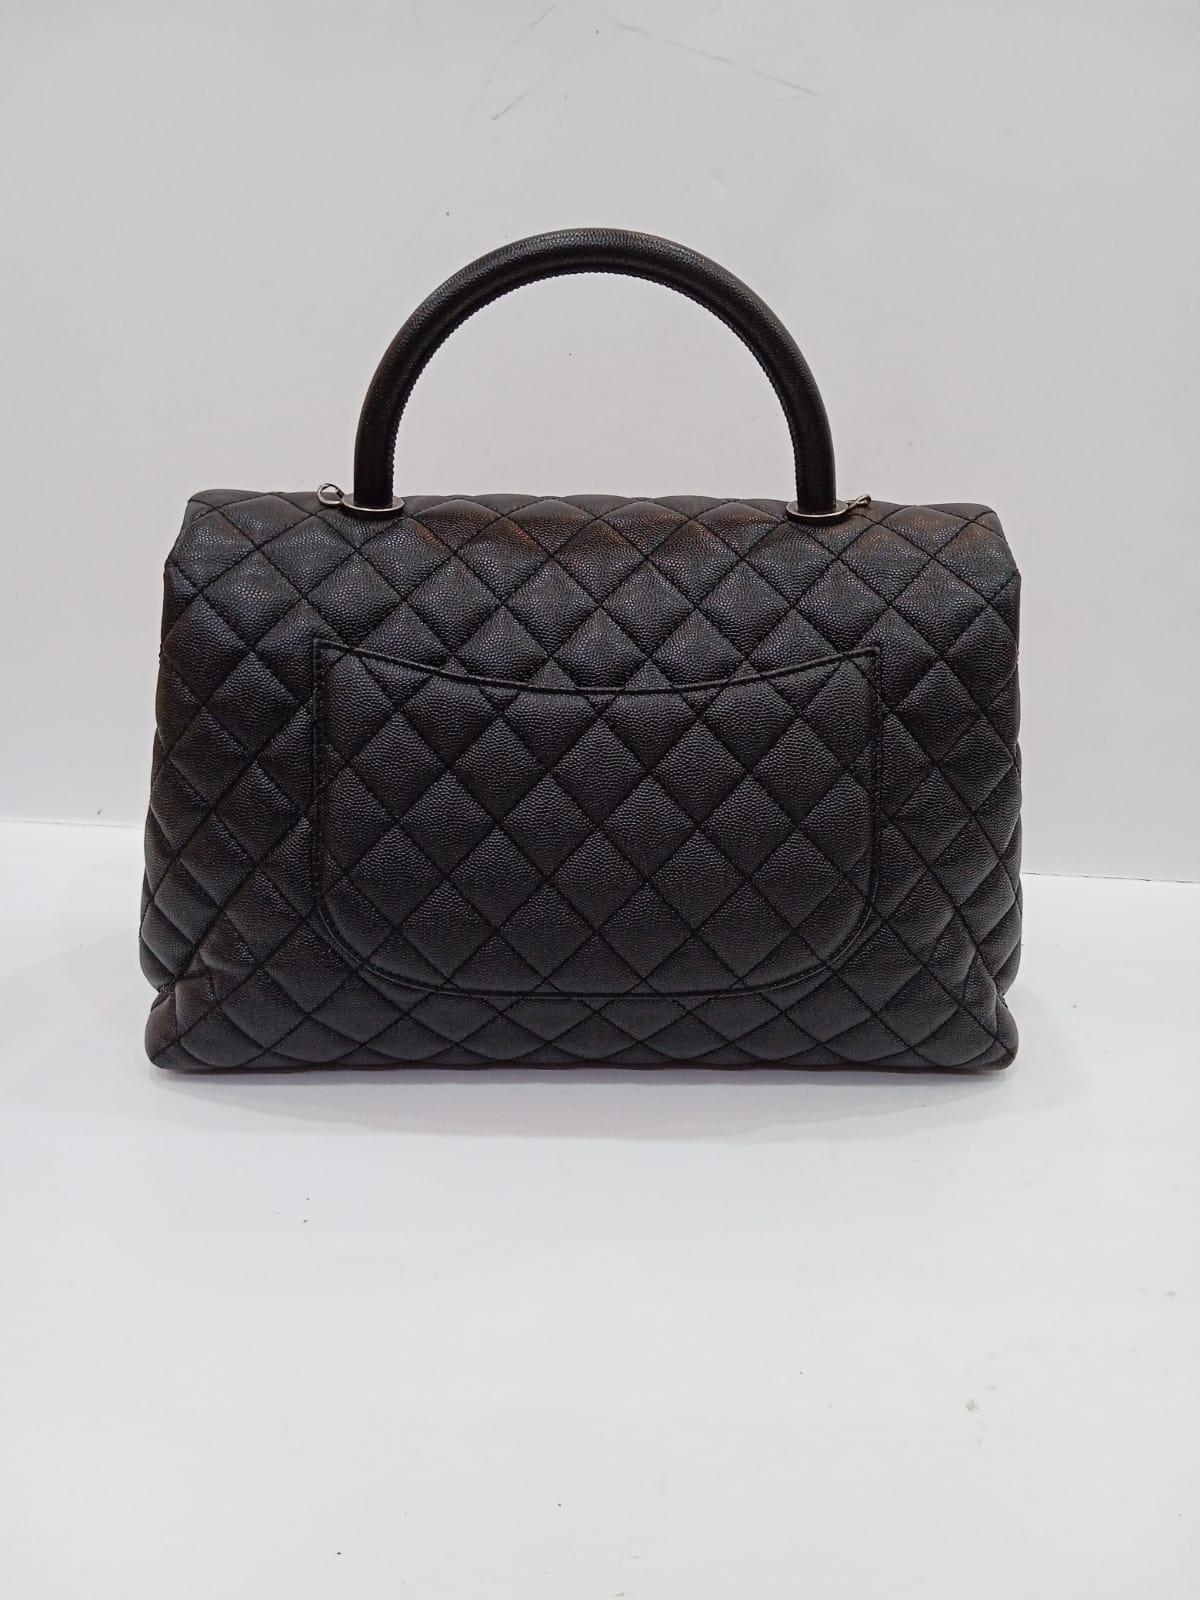 Chanel Black Caviar Quilted Large Coco Handle SHW Bag 9